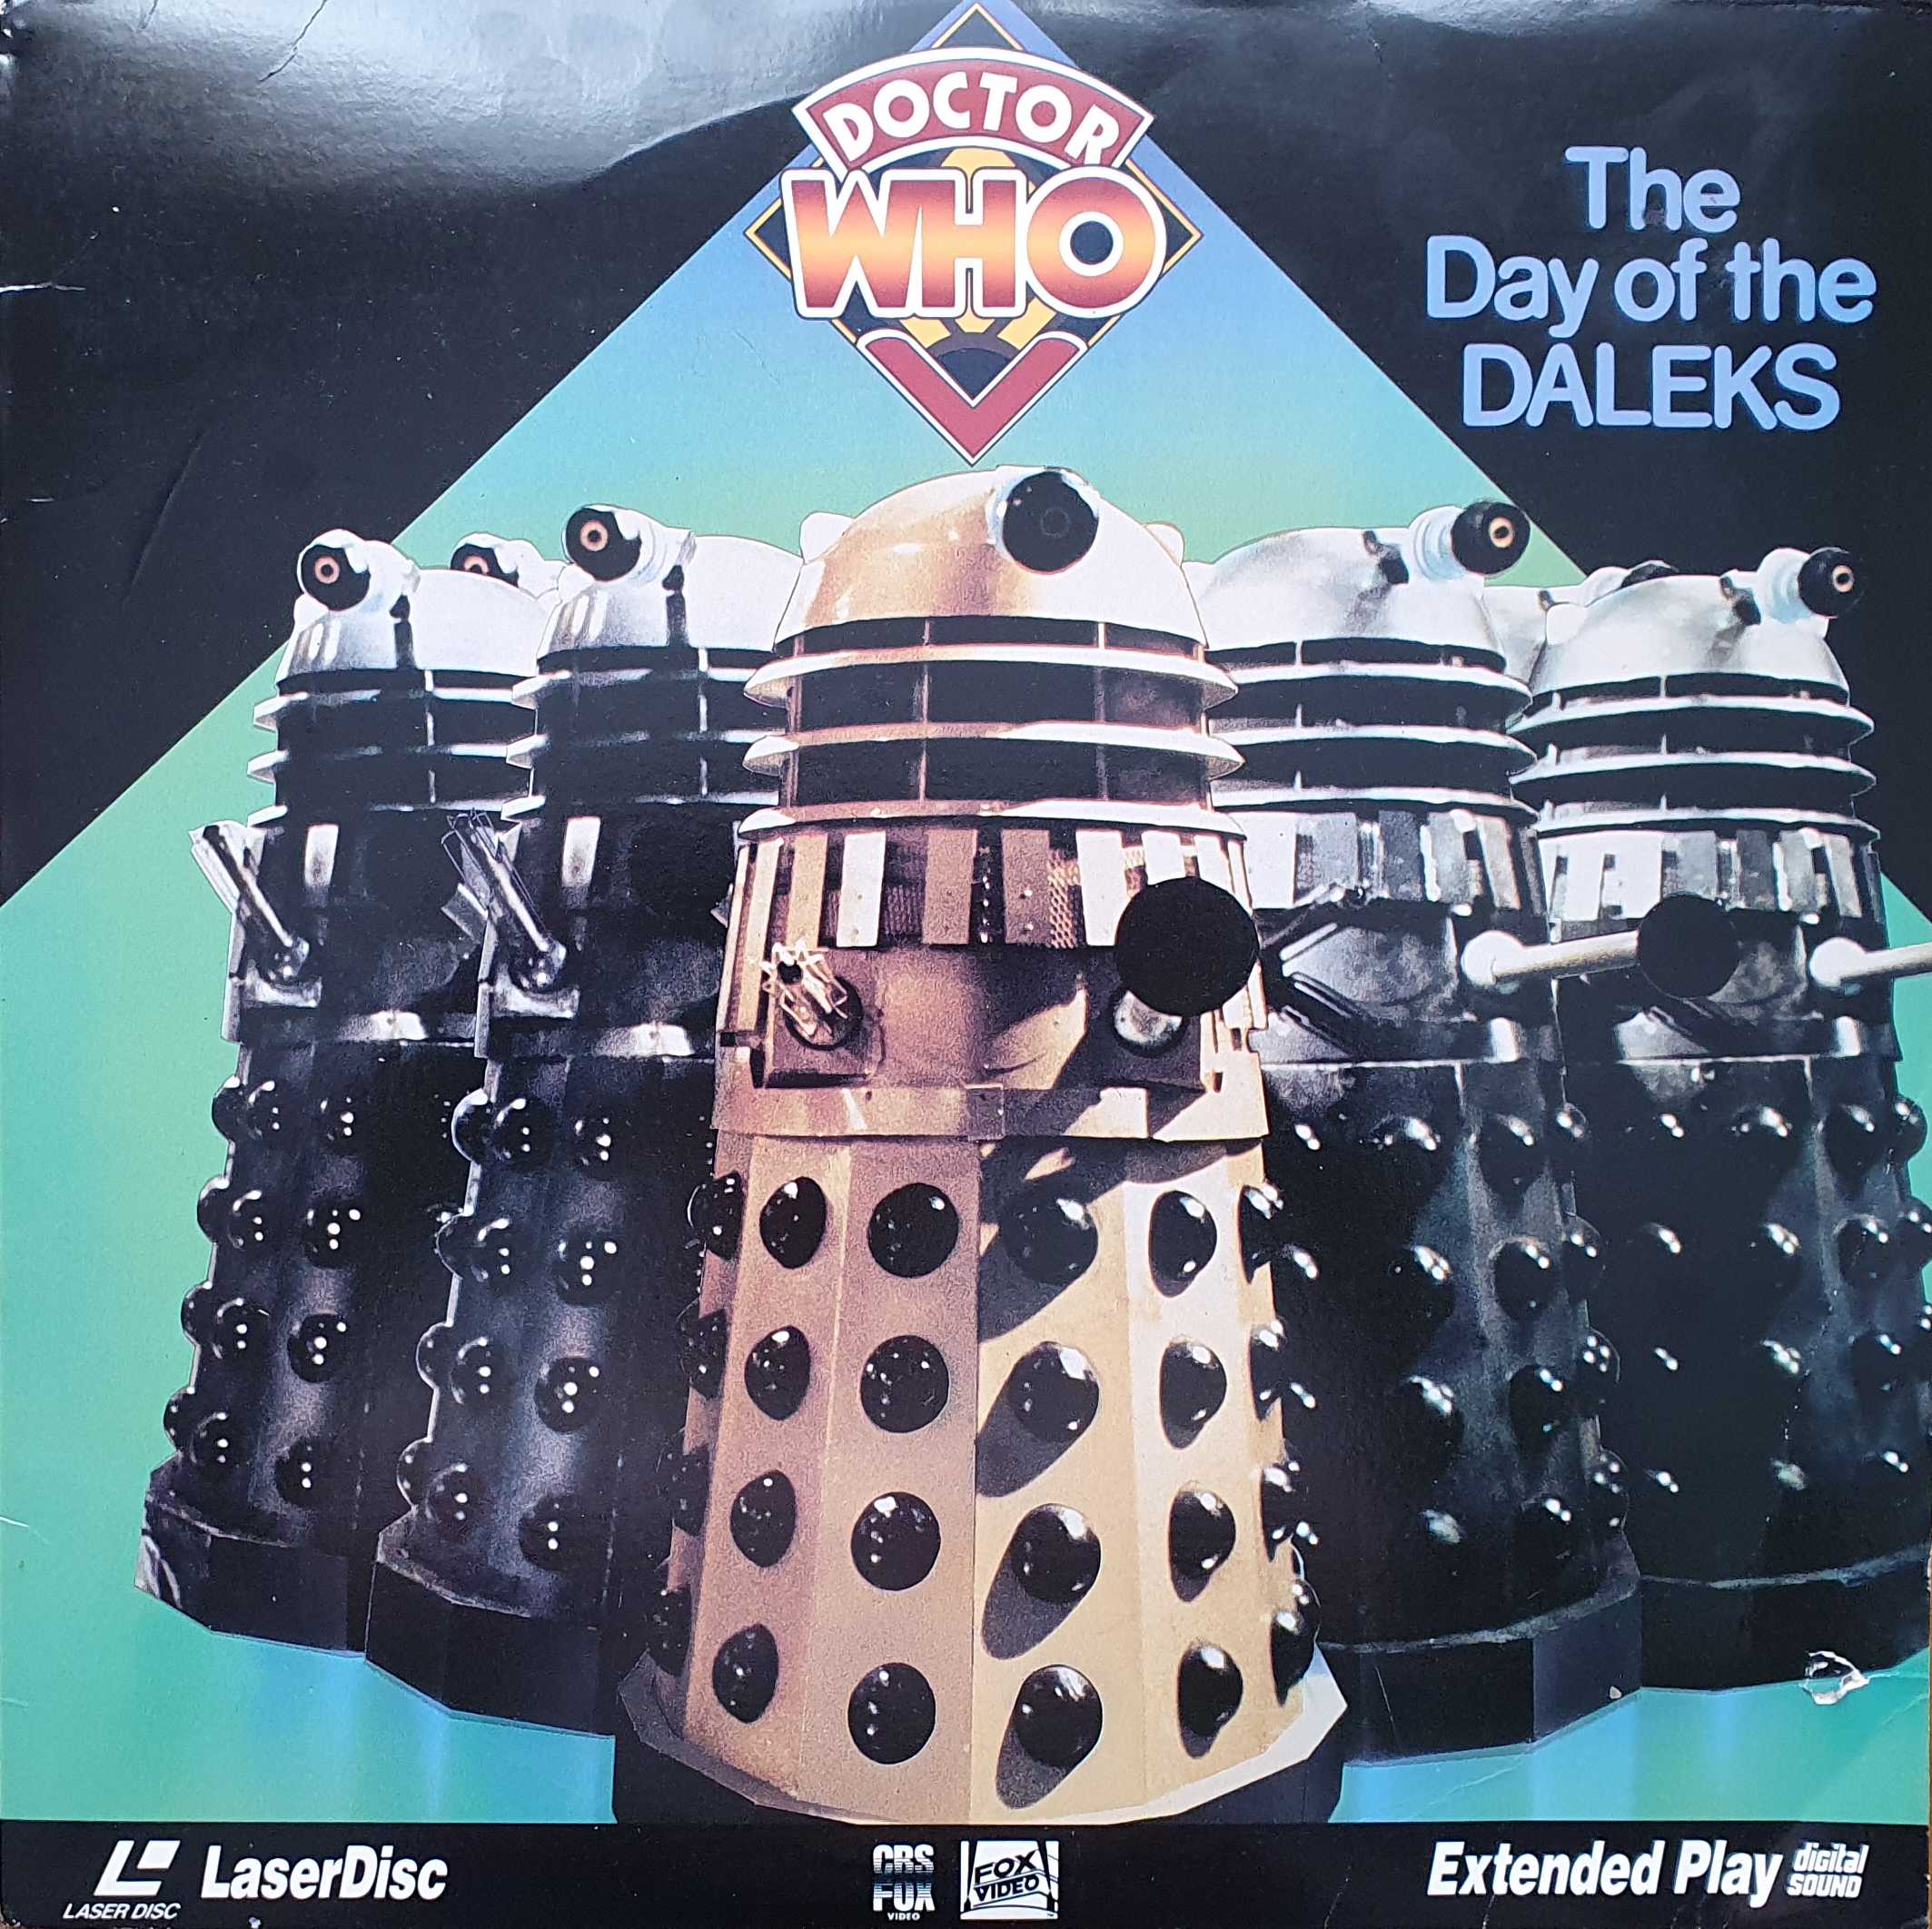 Picture of 5092 - 80 Doctor Who - The day of the Daleks by artist Louis Marks from the BBC records and Tapes library